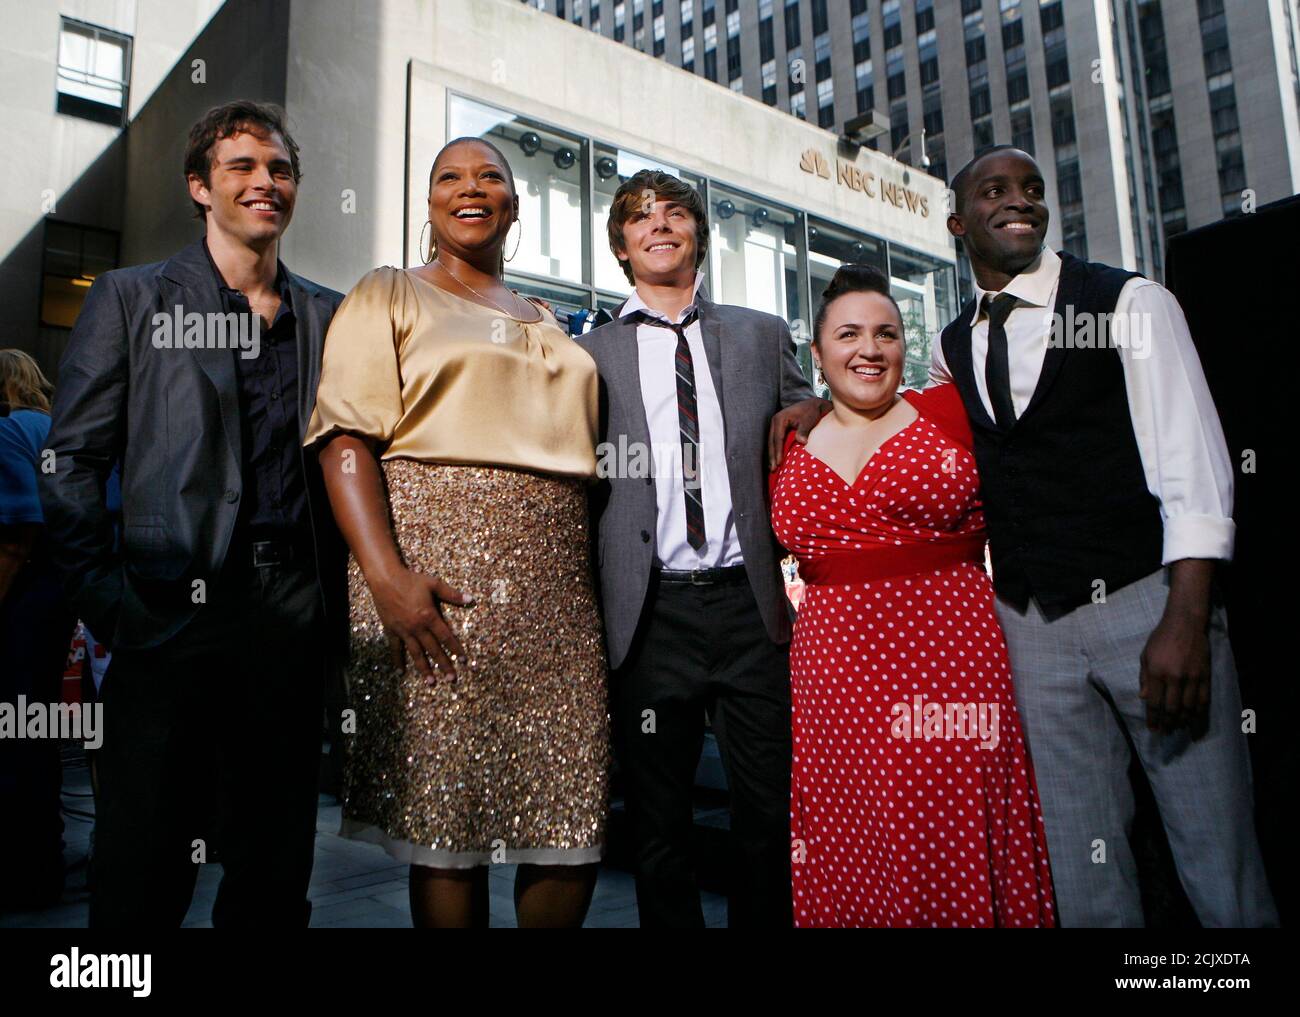 Cast members (L to R) James Marsden, Queen Latifa,  Zac Efron, Nikki Blonsky and Elijah Kelley of the new movie 'Hairspray' pose together during an appearance on NBC's 'Today' show in New York, July 20, 2007.     REUTERS/Brendan McDermid (UNITED STATES) Stock Photo